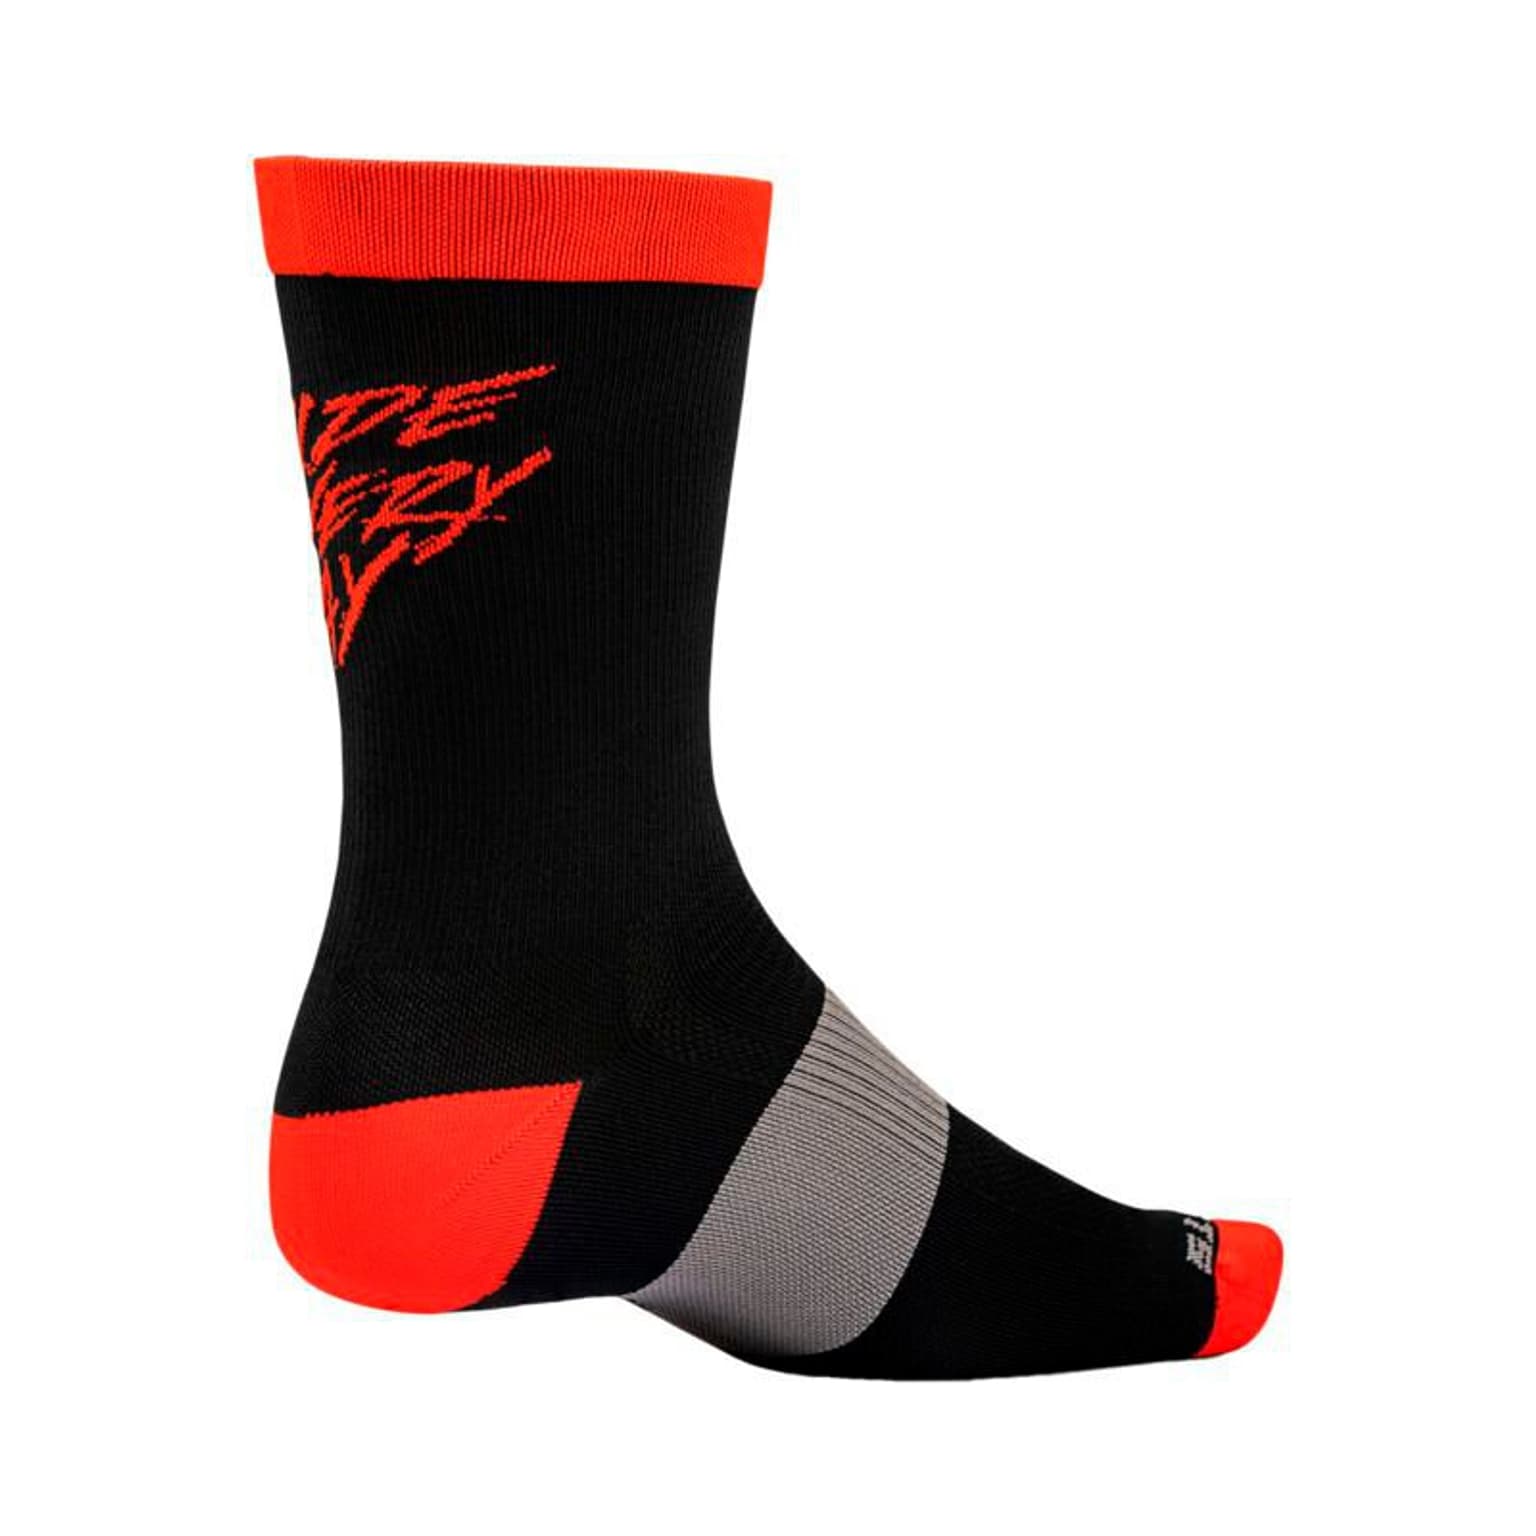 Ride Concepts Ride Concepts Ride Every Day Synthetic Velosocken rouge 1